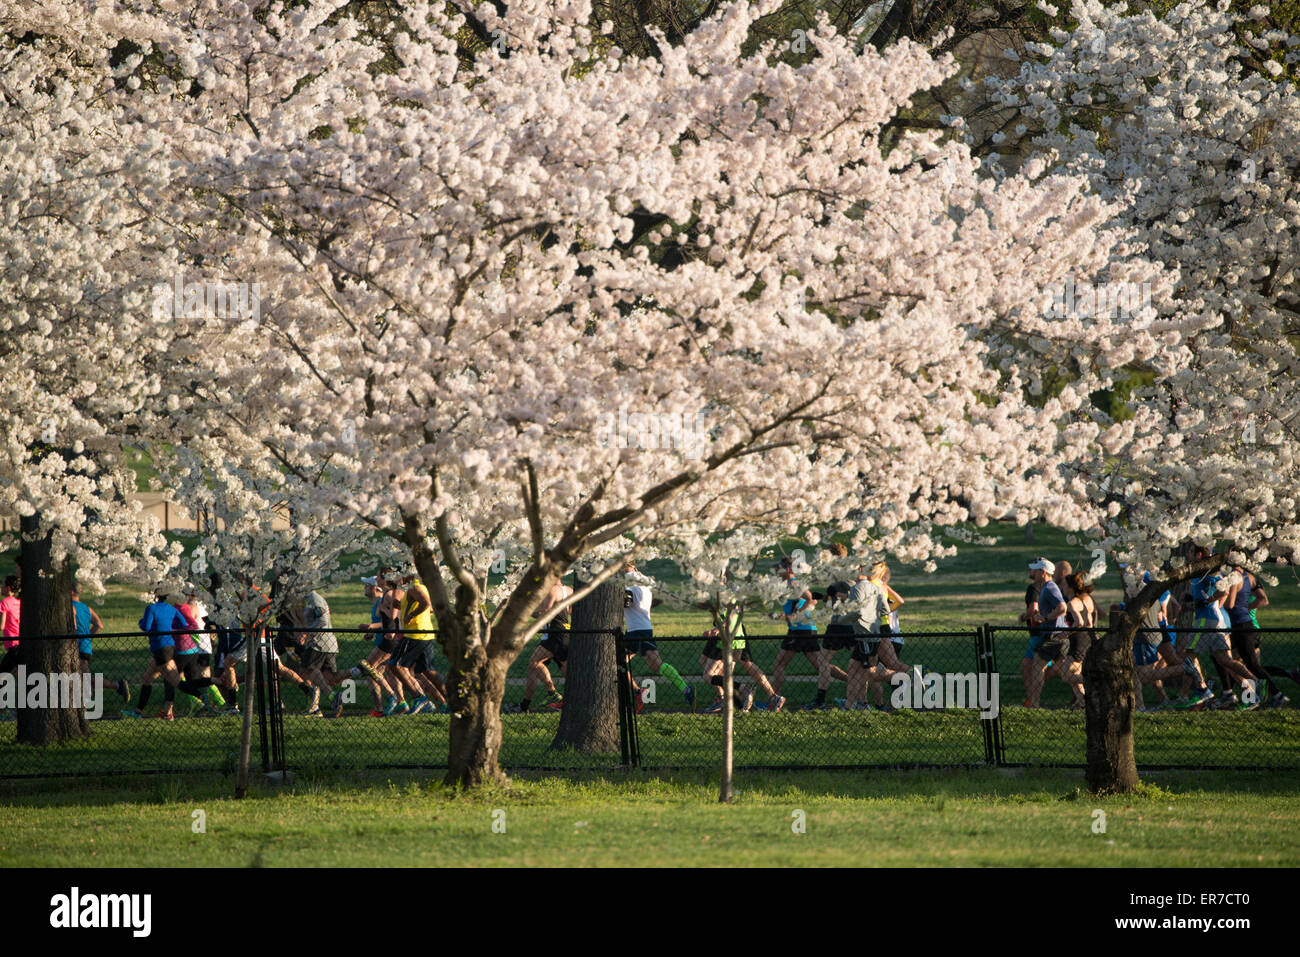 WASHINGTON DC, USA - Runners pass by Washington DC's famous cherry blossoms in full bloom during the running of the annual Cherry Blossom 10-Miler. The Cherry Blossom 10-Miler (formally the Credit Union Cherry Blossom 10 Mile Run) is held each spring during the National Cherry Blossom Festival and attracts tends of thousands of runners. Stock Photo